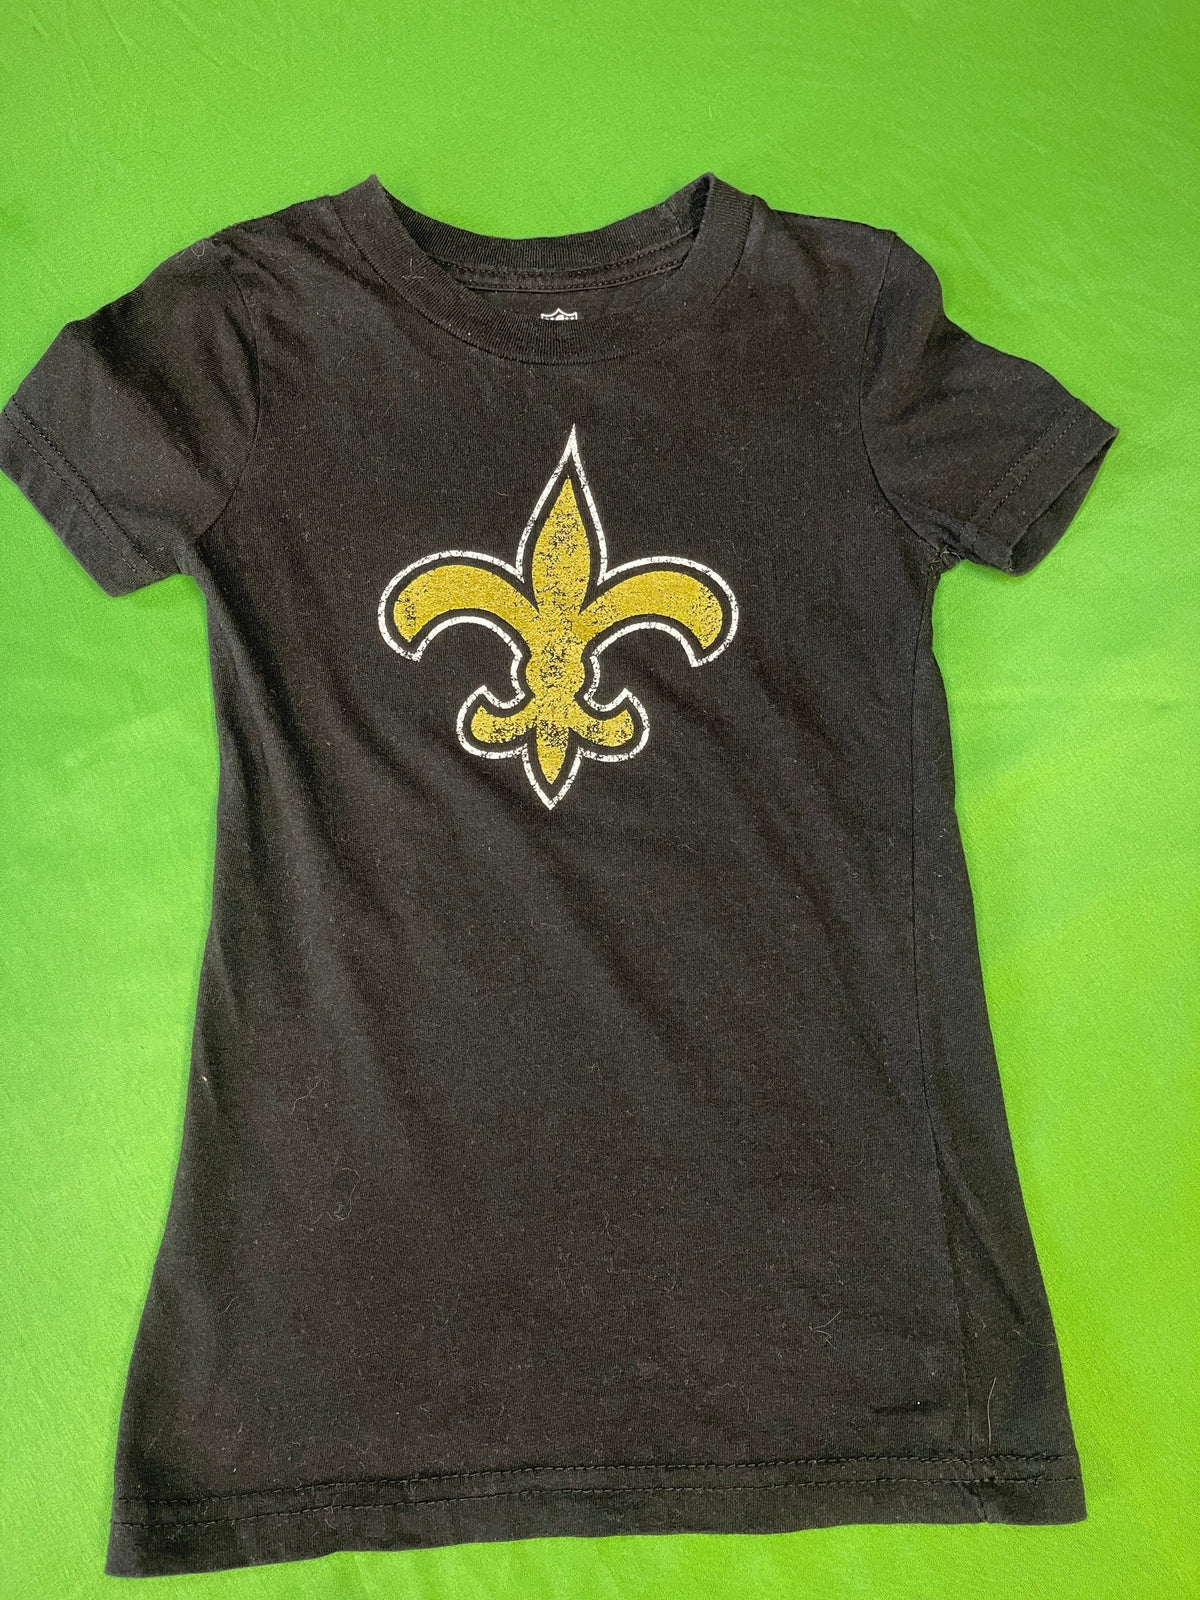 NFL New Orleans Saints Black 100% Cotton T-Shirt Youth Small 5-6